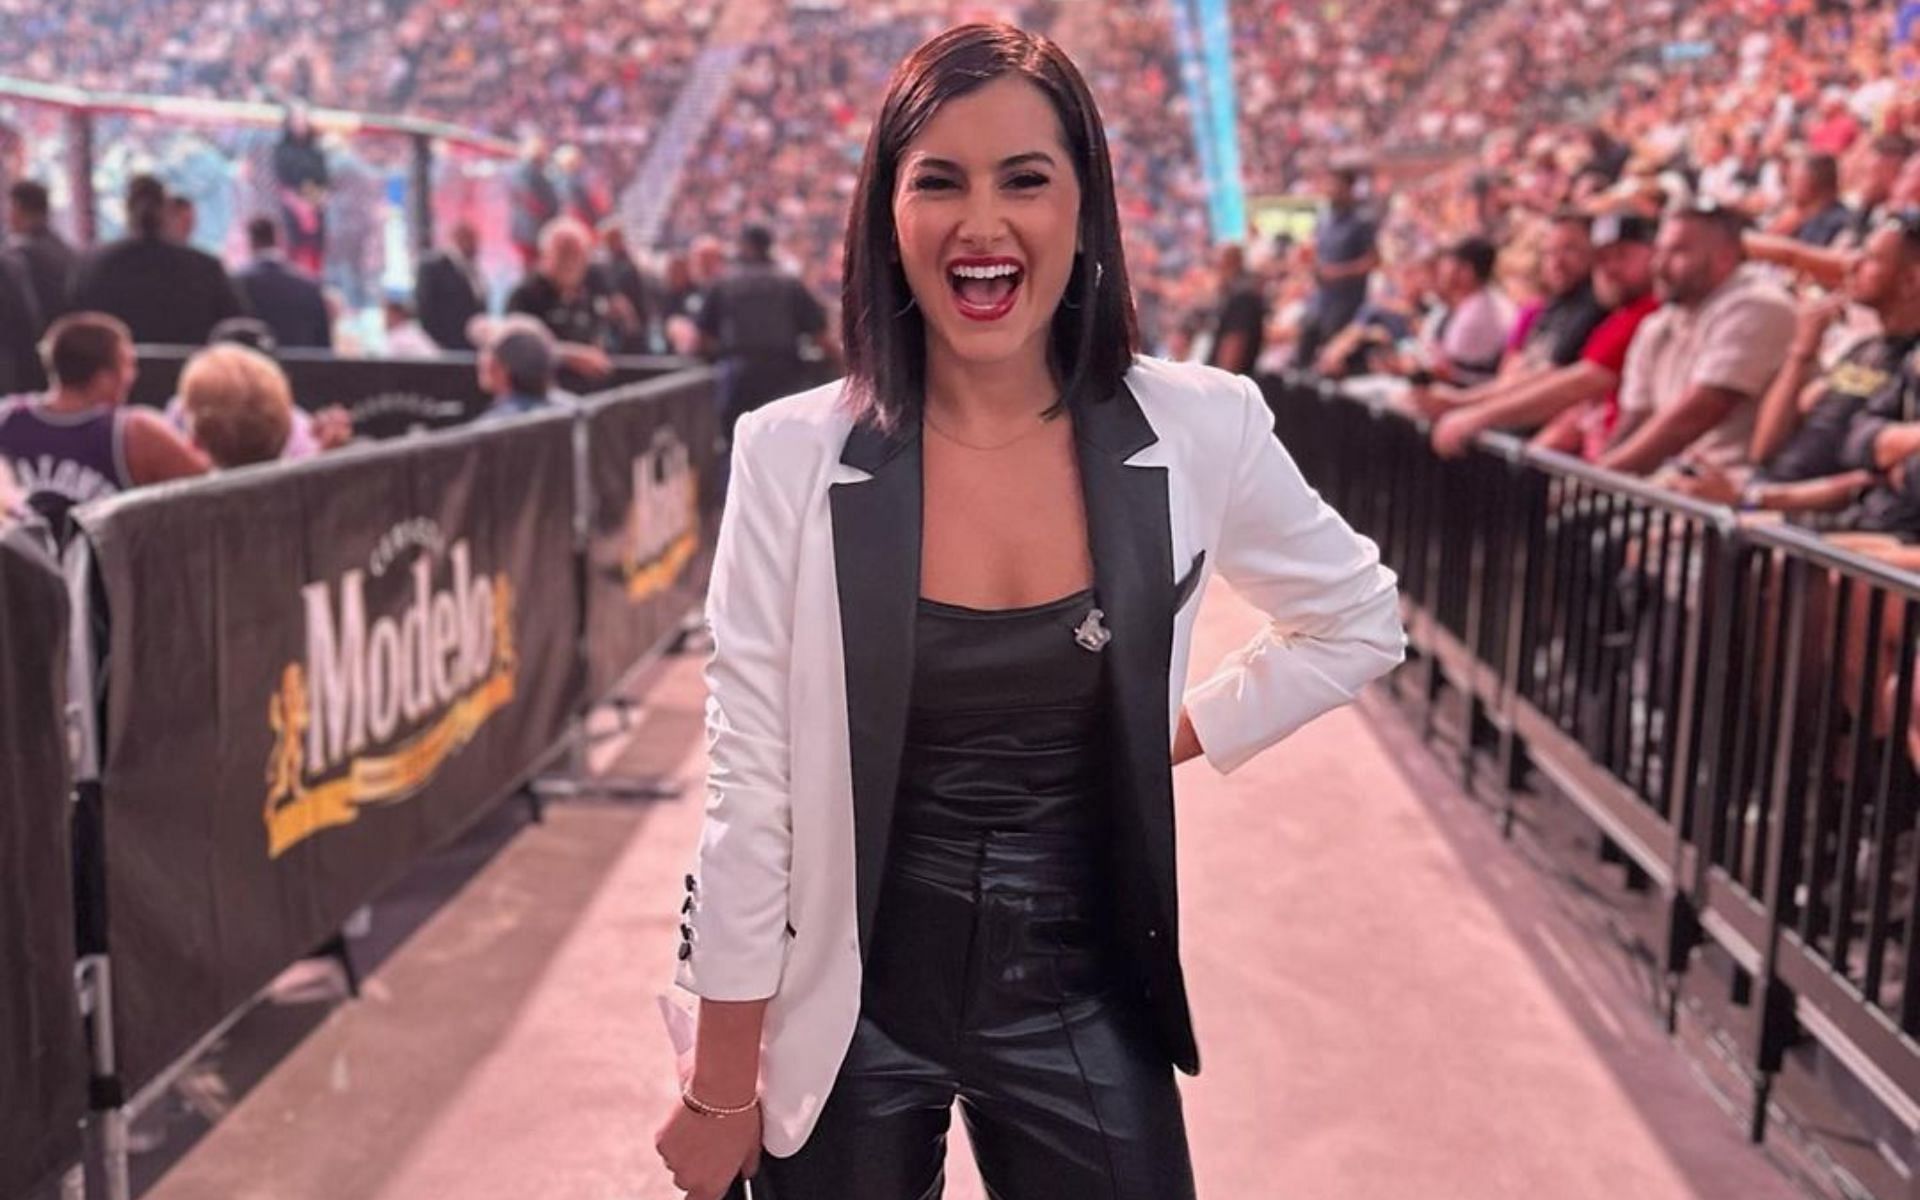 Megan Olivi lashes out at a fan who remarked about her bikini photo